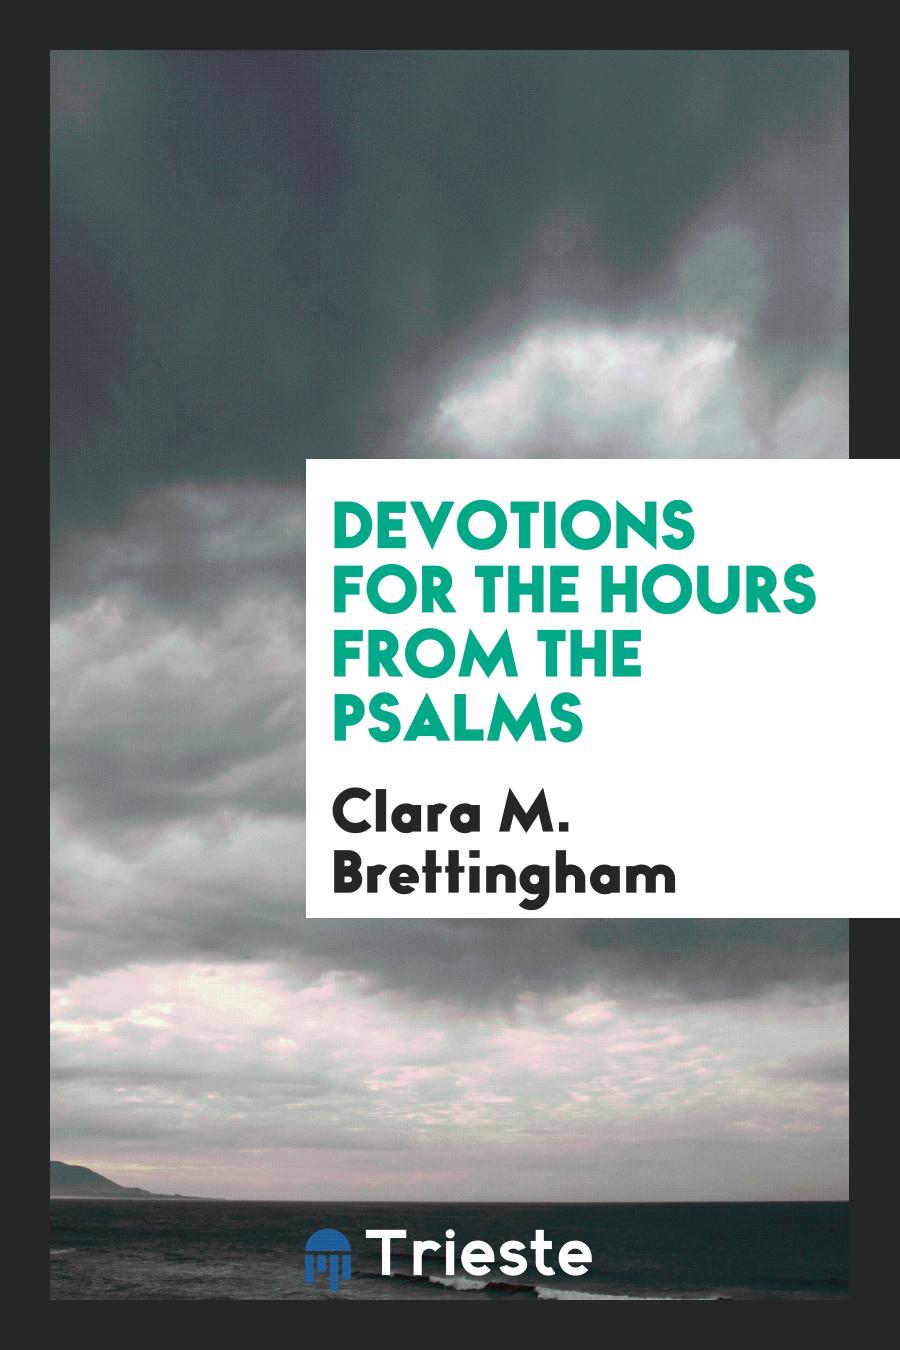 Devotions for the Hours from the Psalms